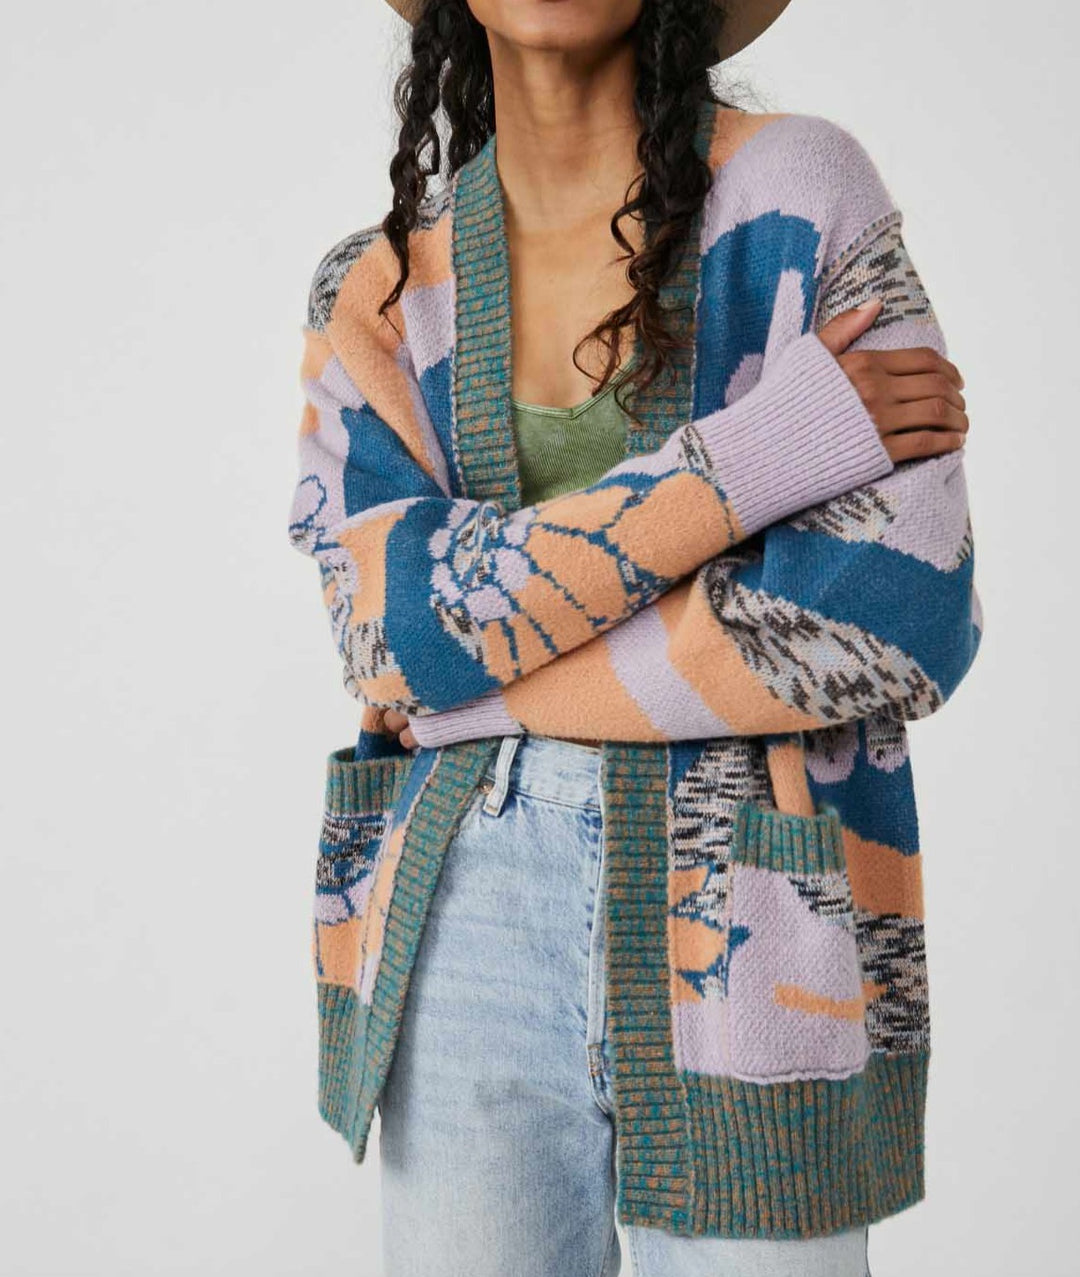 AUGUST CARDIGAN - ORCHID TEAL COMBO - Kingfisher Road - Online Boutique